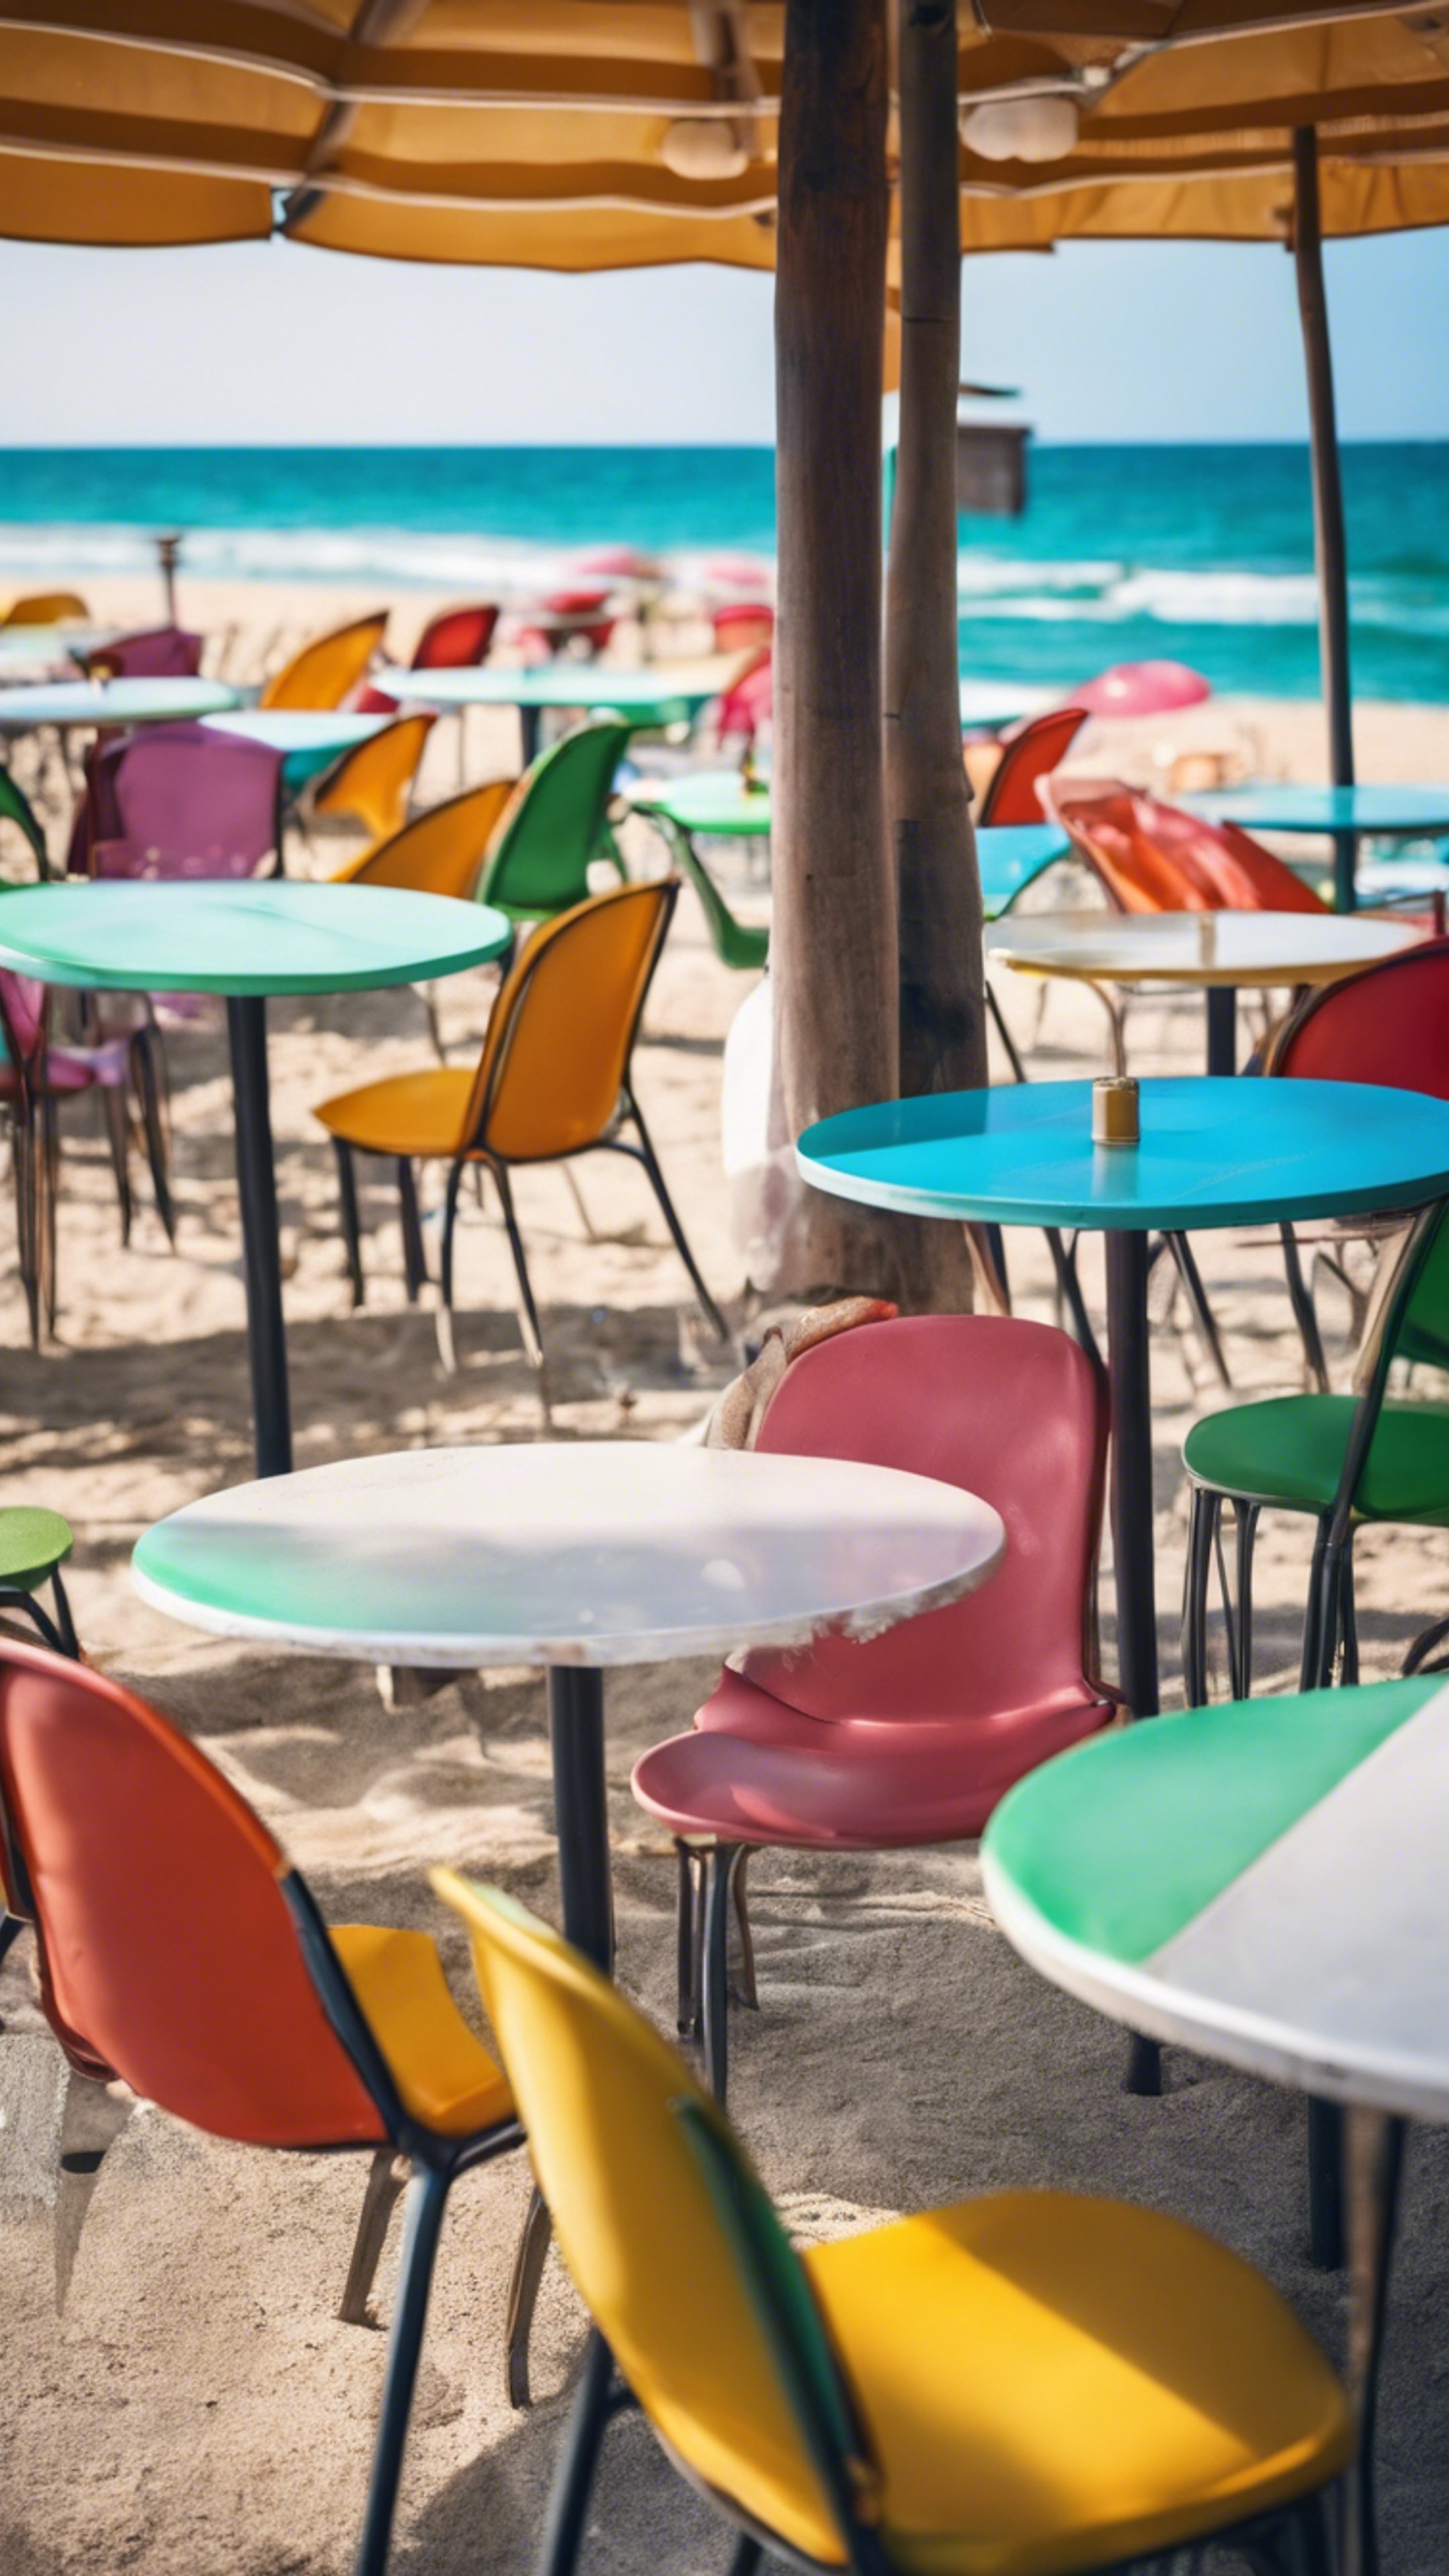 A beach side cafe with colorful chairs, umbrellas, and a panoramic view of the ocean. Fond d'écran[e8a344cbd52d49a3867e]